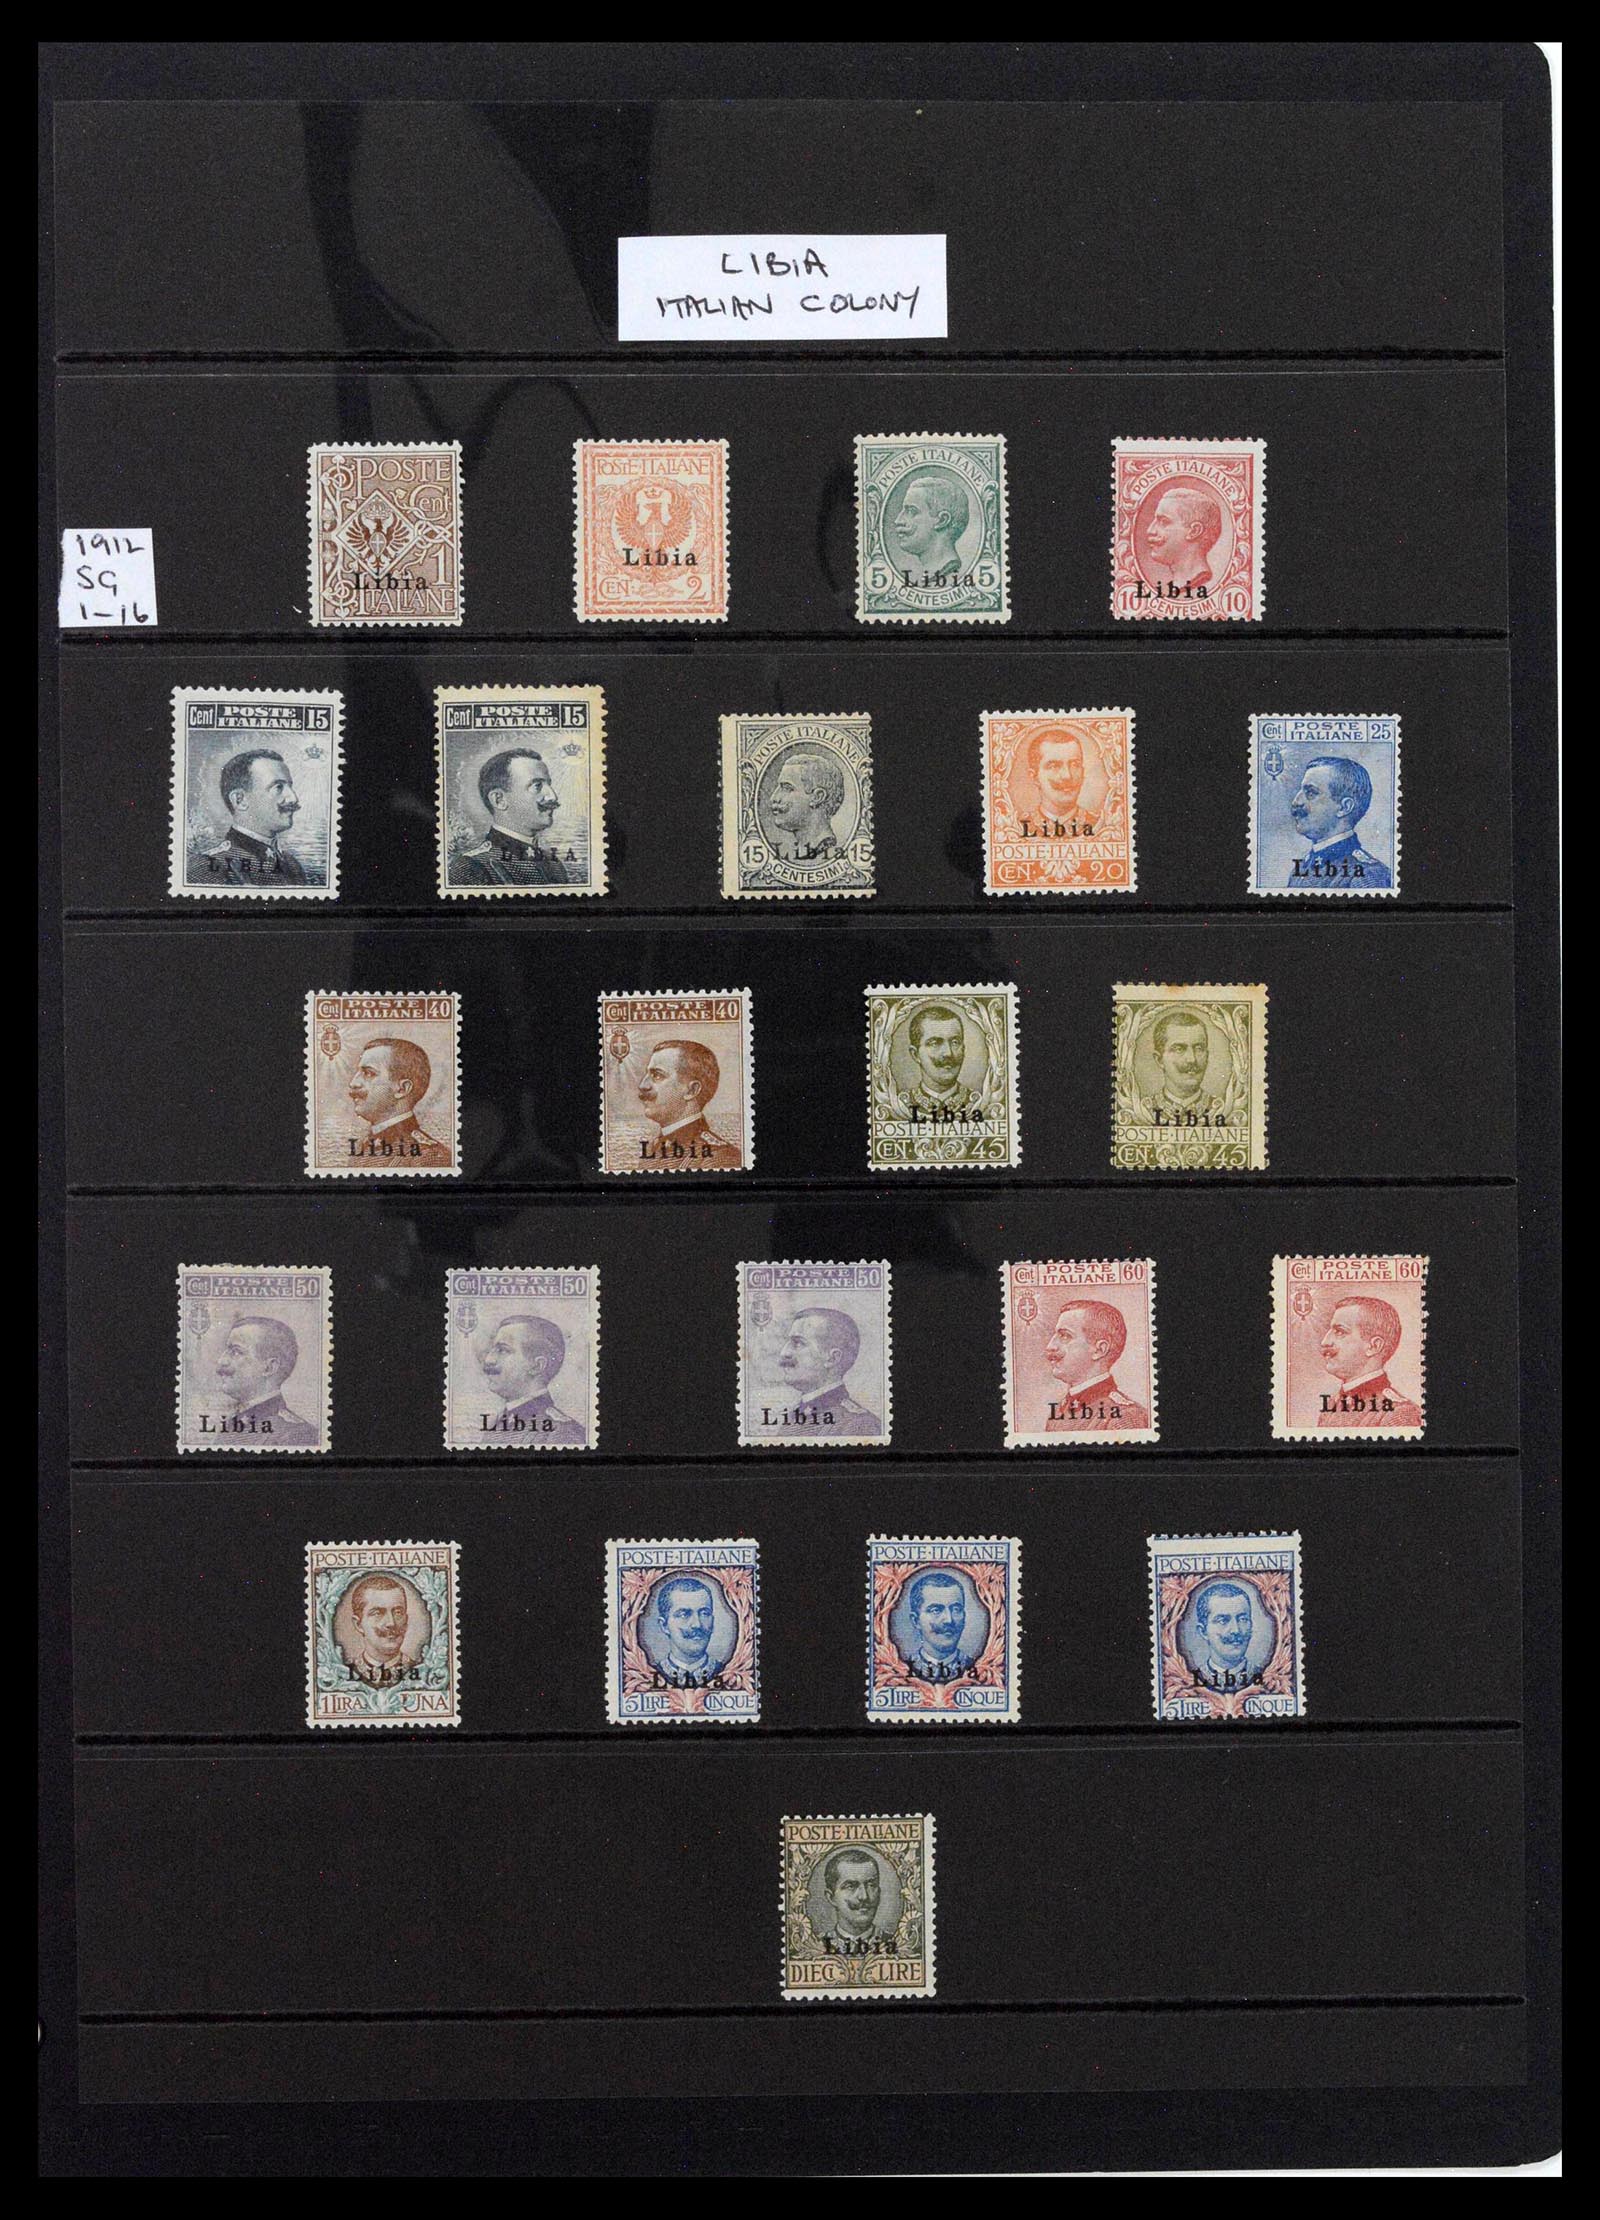 39140 0003 - Stamp collection 39140 Italian colonies 1874-1941.